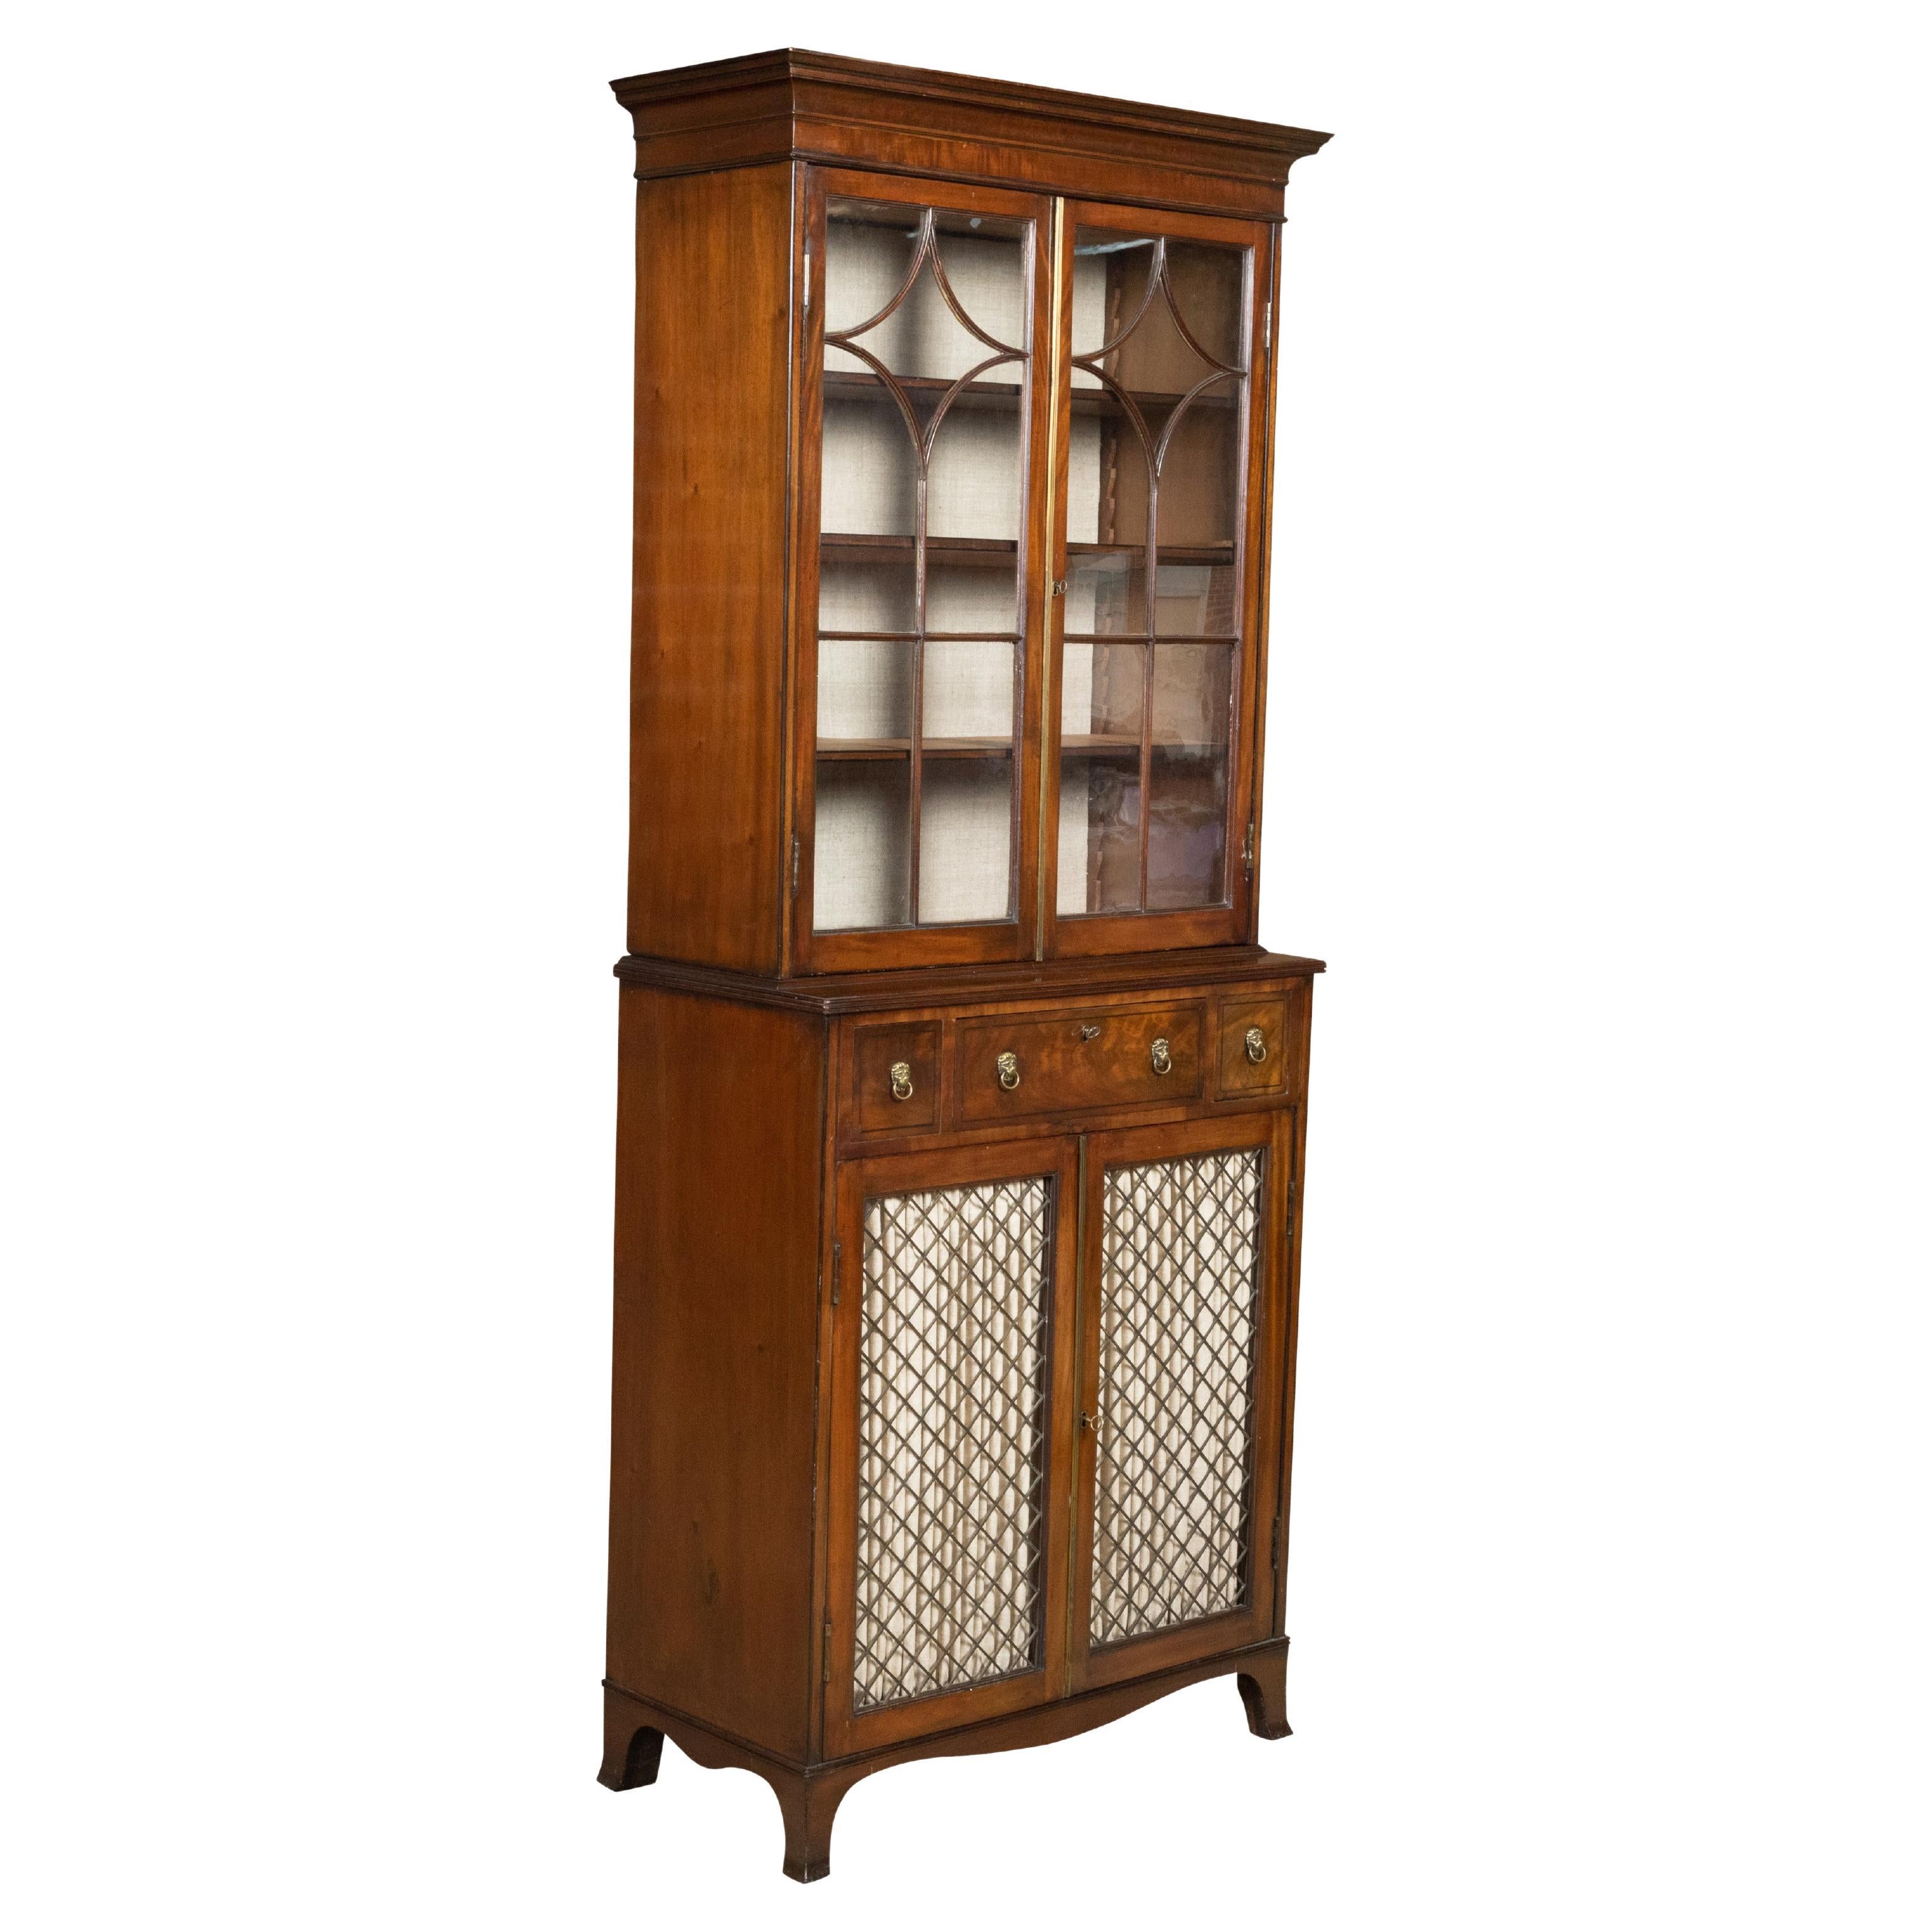 English 1840s Mahogany Veneered Vitrine Cabinet with Glass Doors and Drawers For Sale